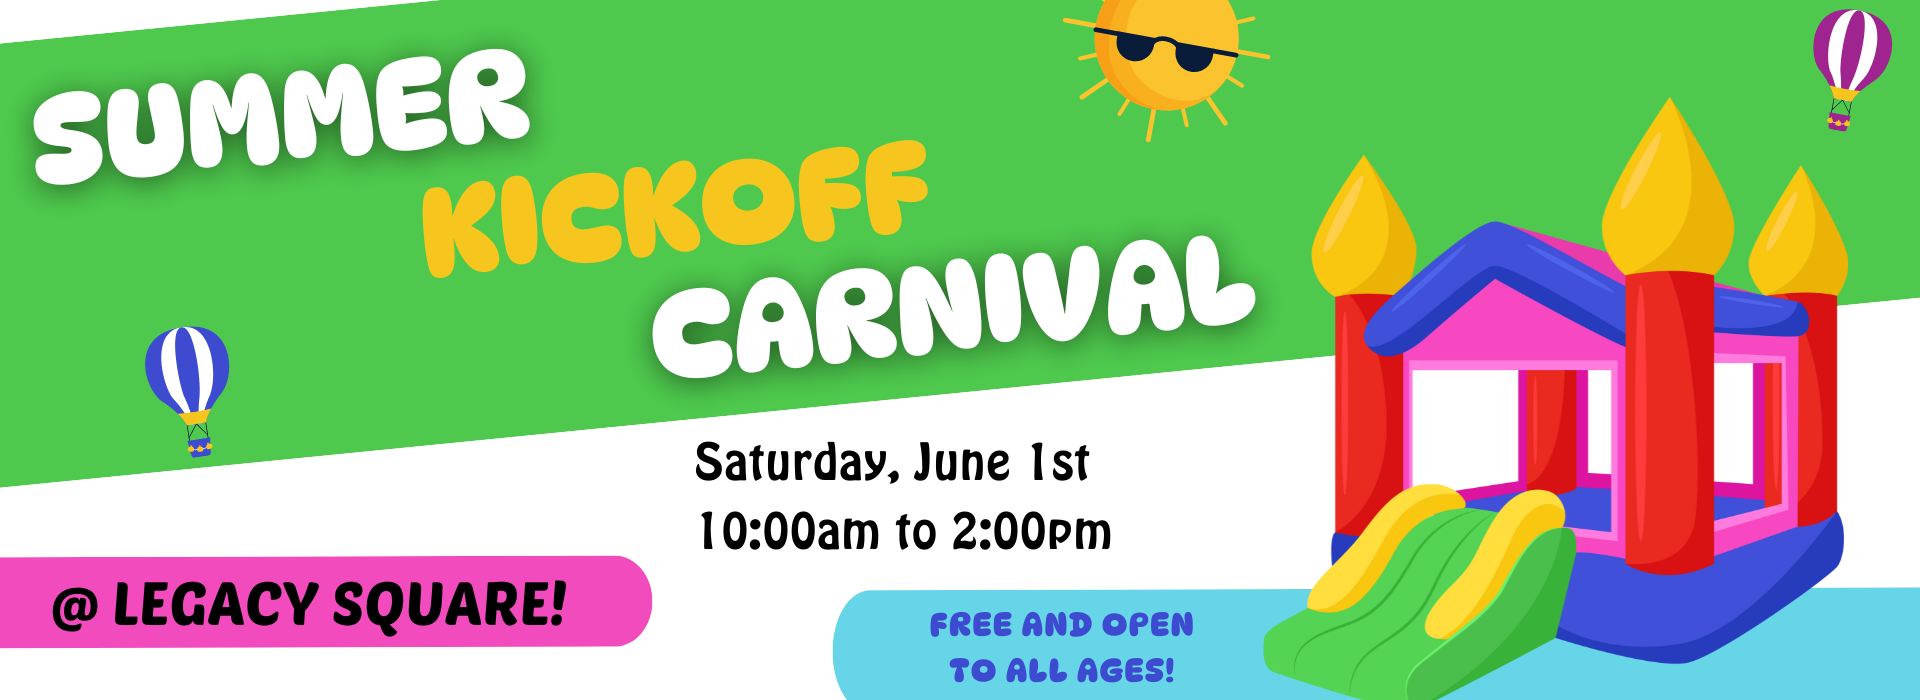 Kickoff Carnival June 1st at Legay Square from 10am to 2pm